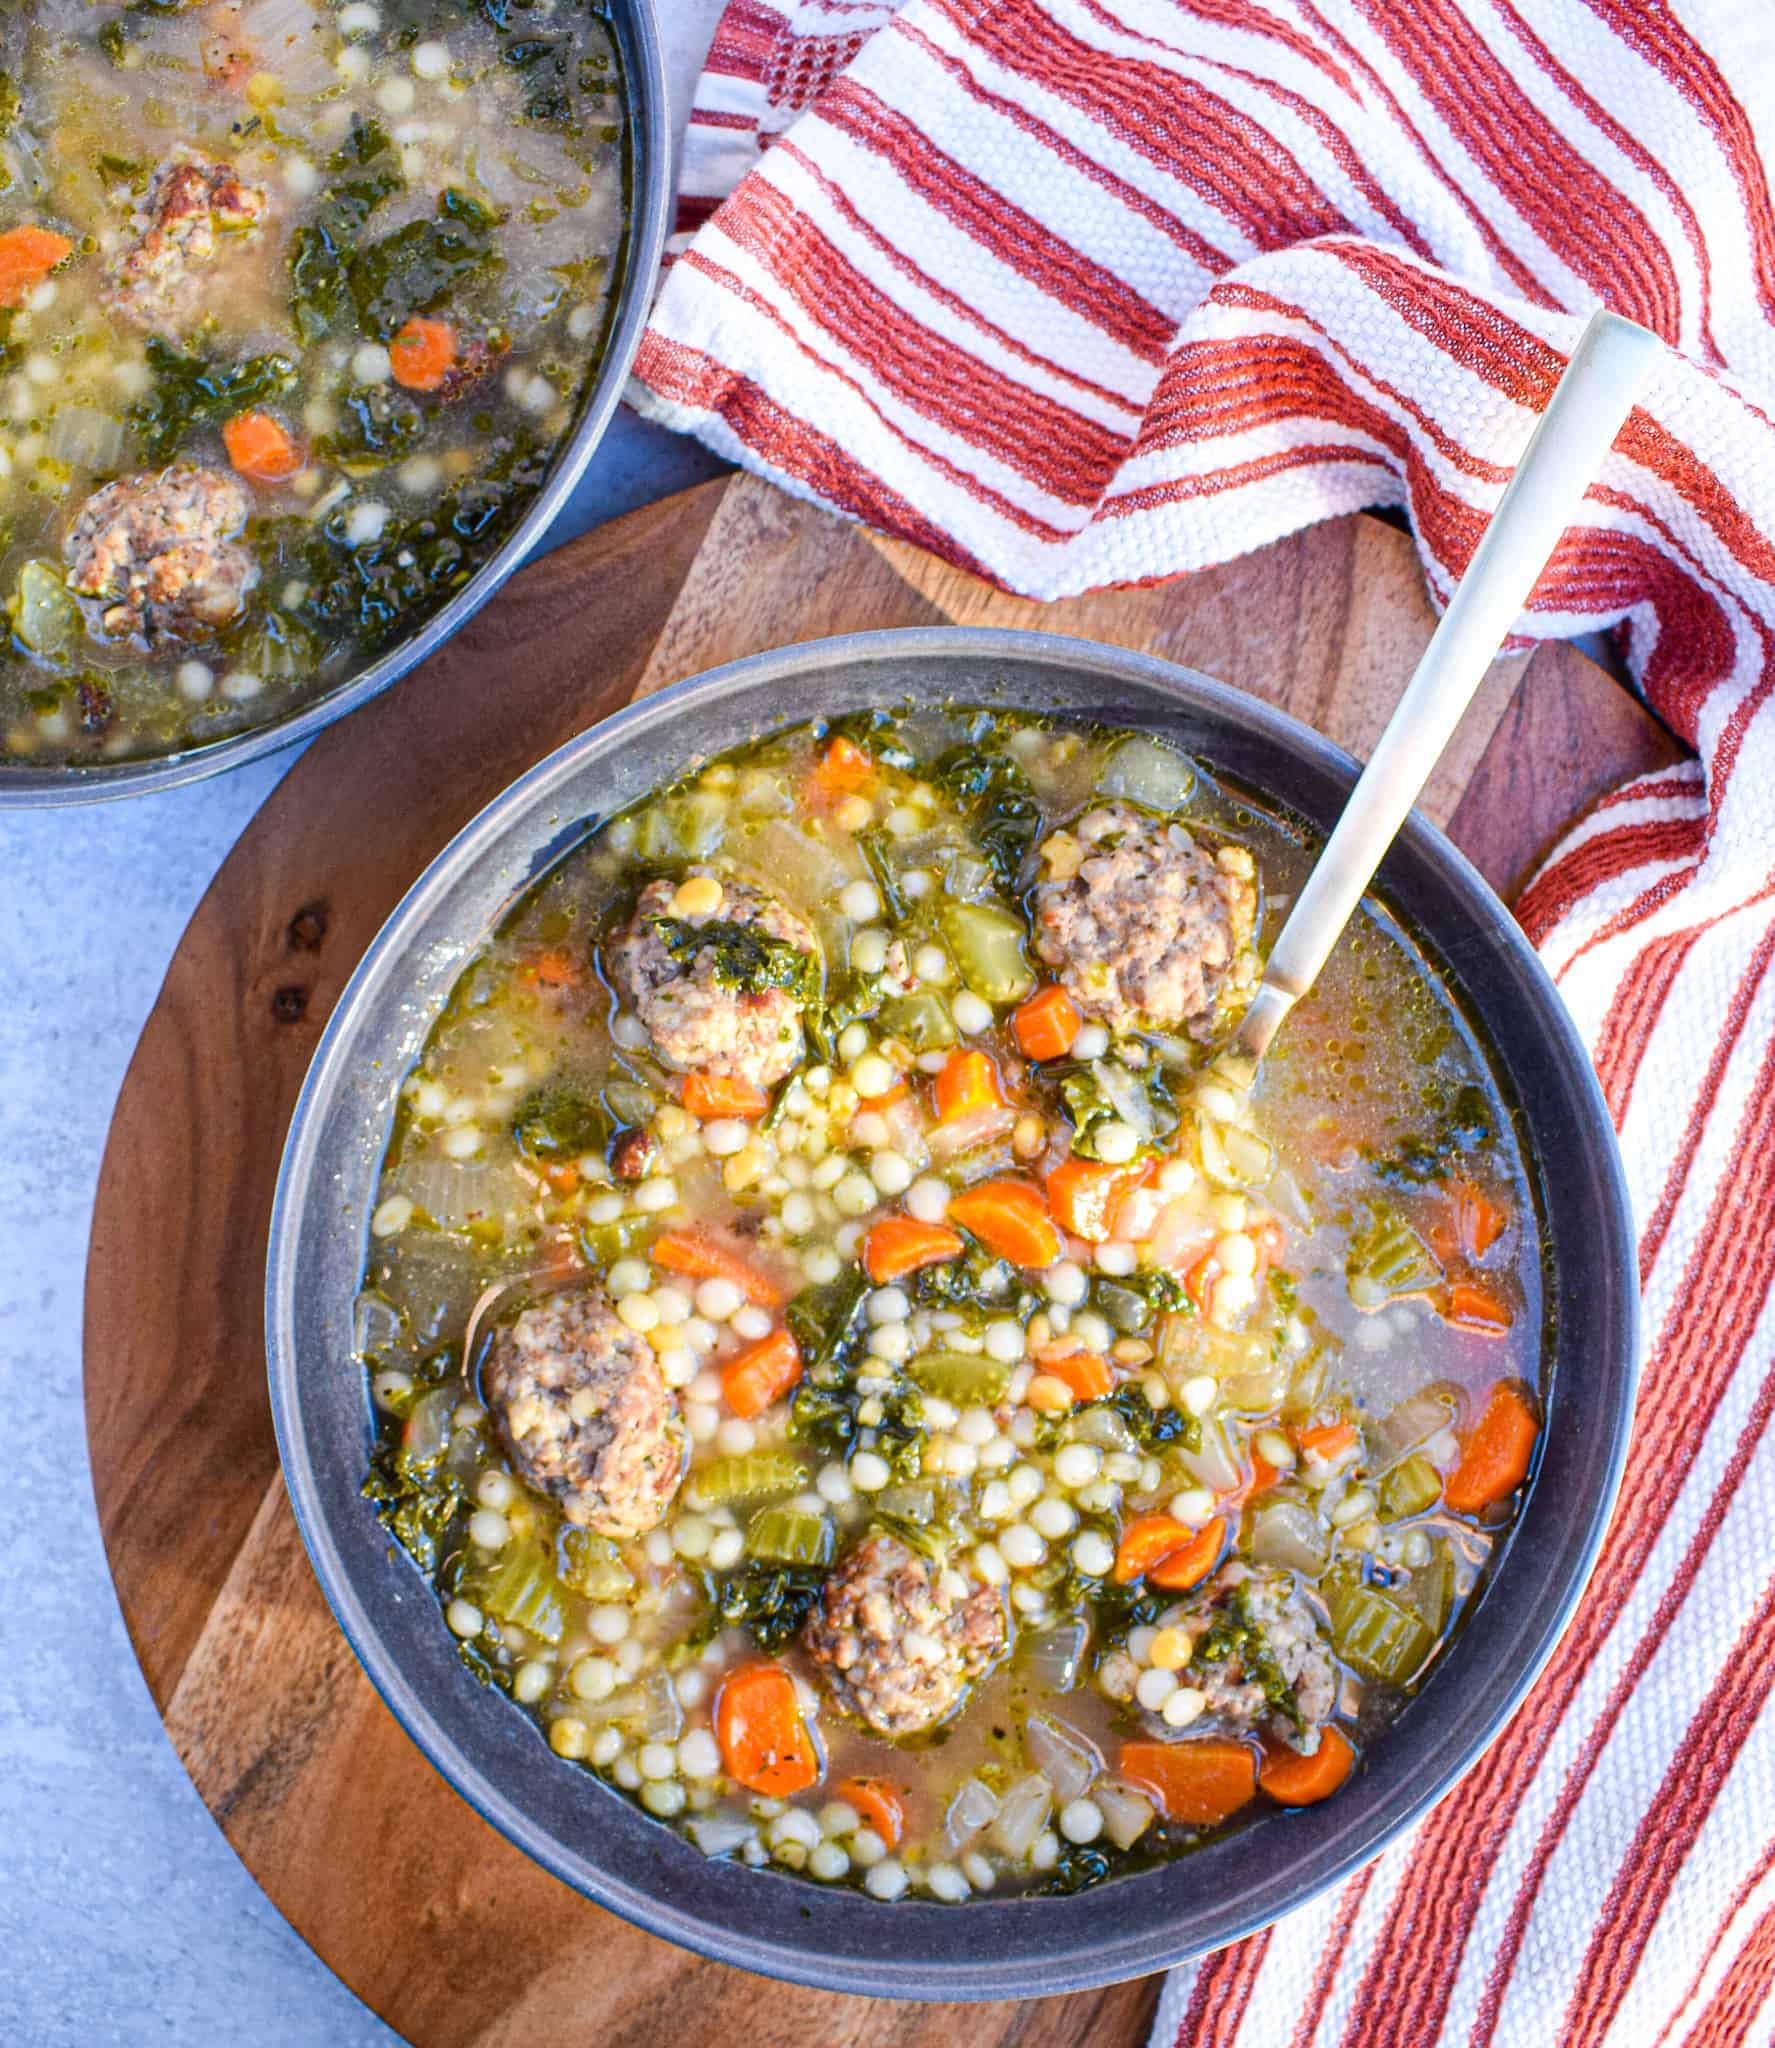 Italian wedding soup with cous cous